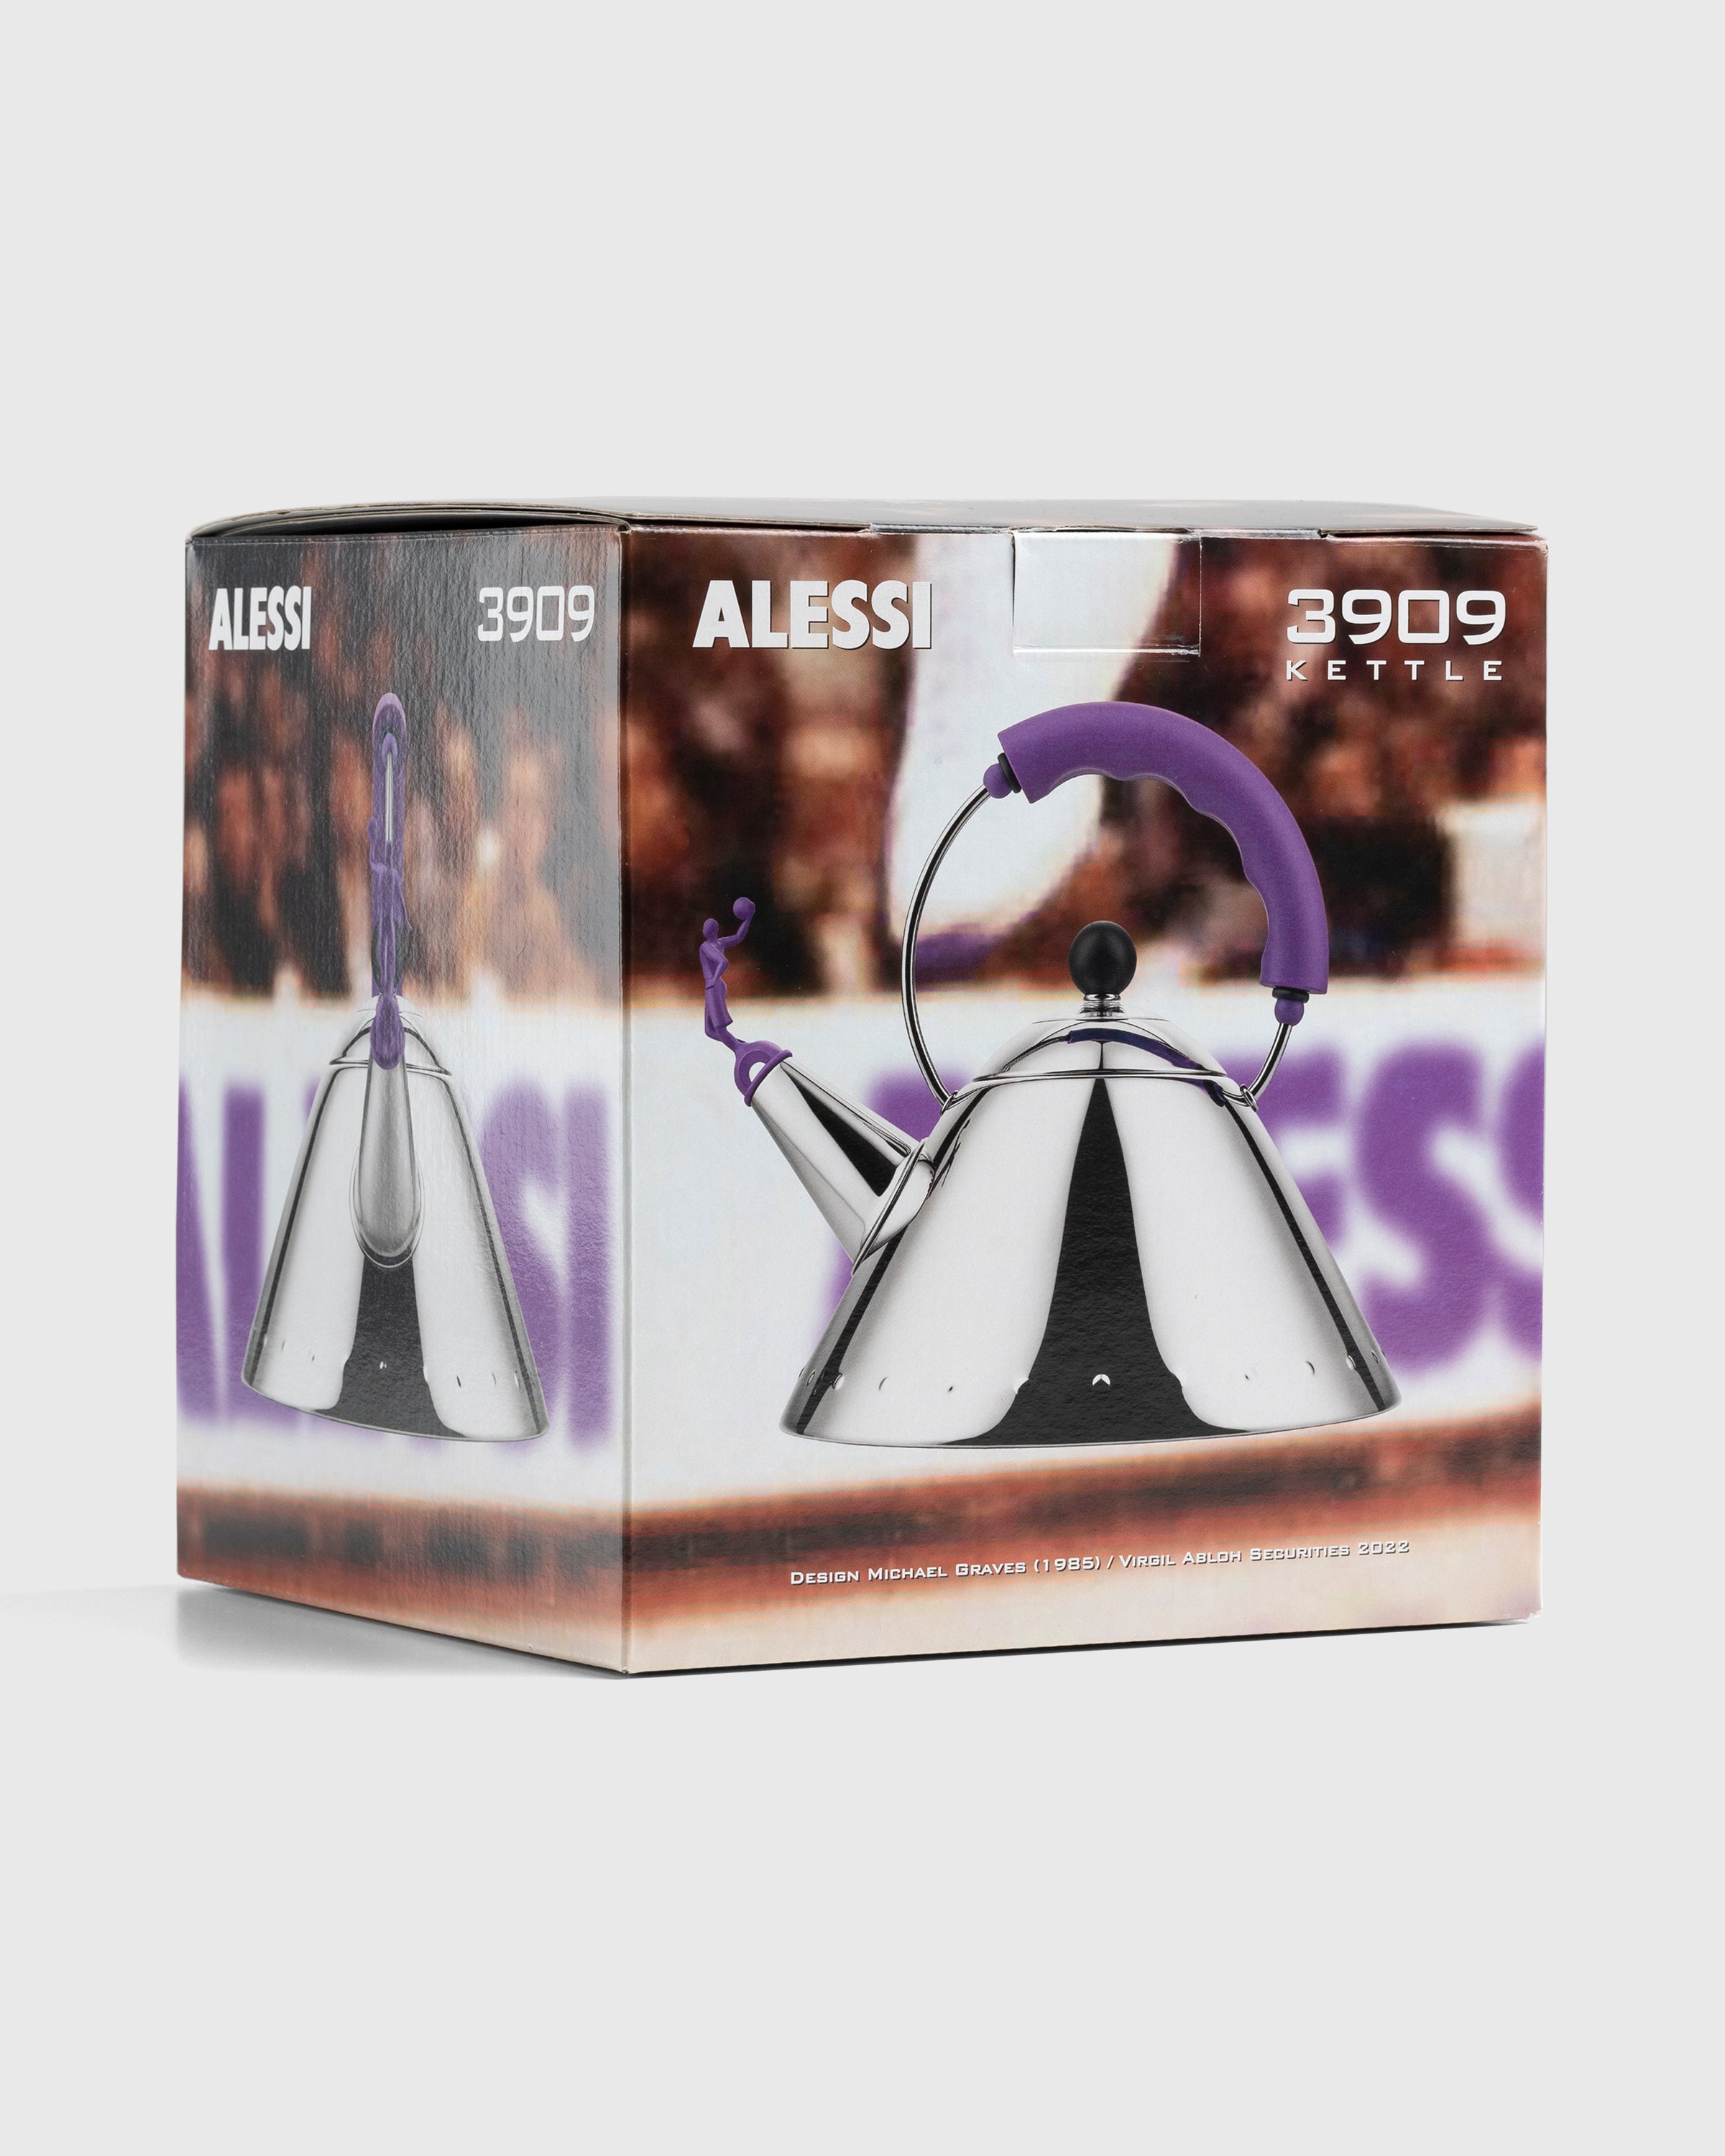 ALESSI - 3909 KETTLE BY VIRGIL ABLOH SECURITIES FOR ALESSI - Lifestyle - Silver - Image 5